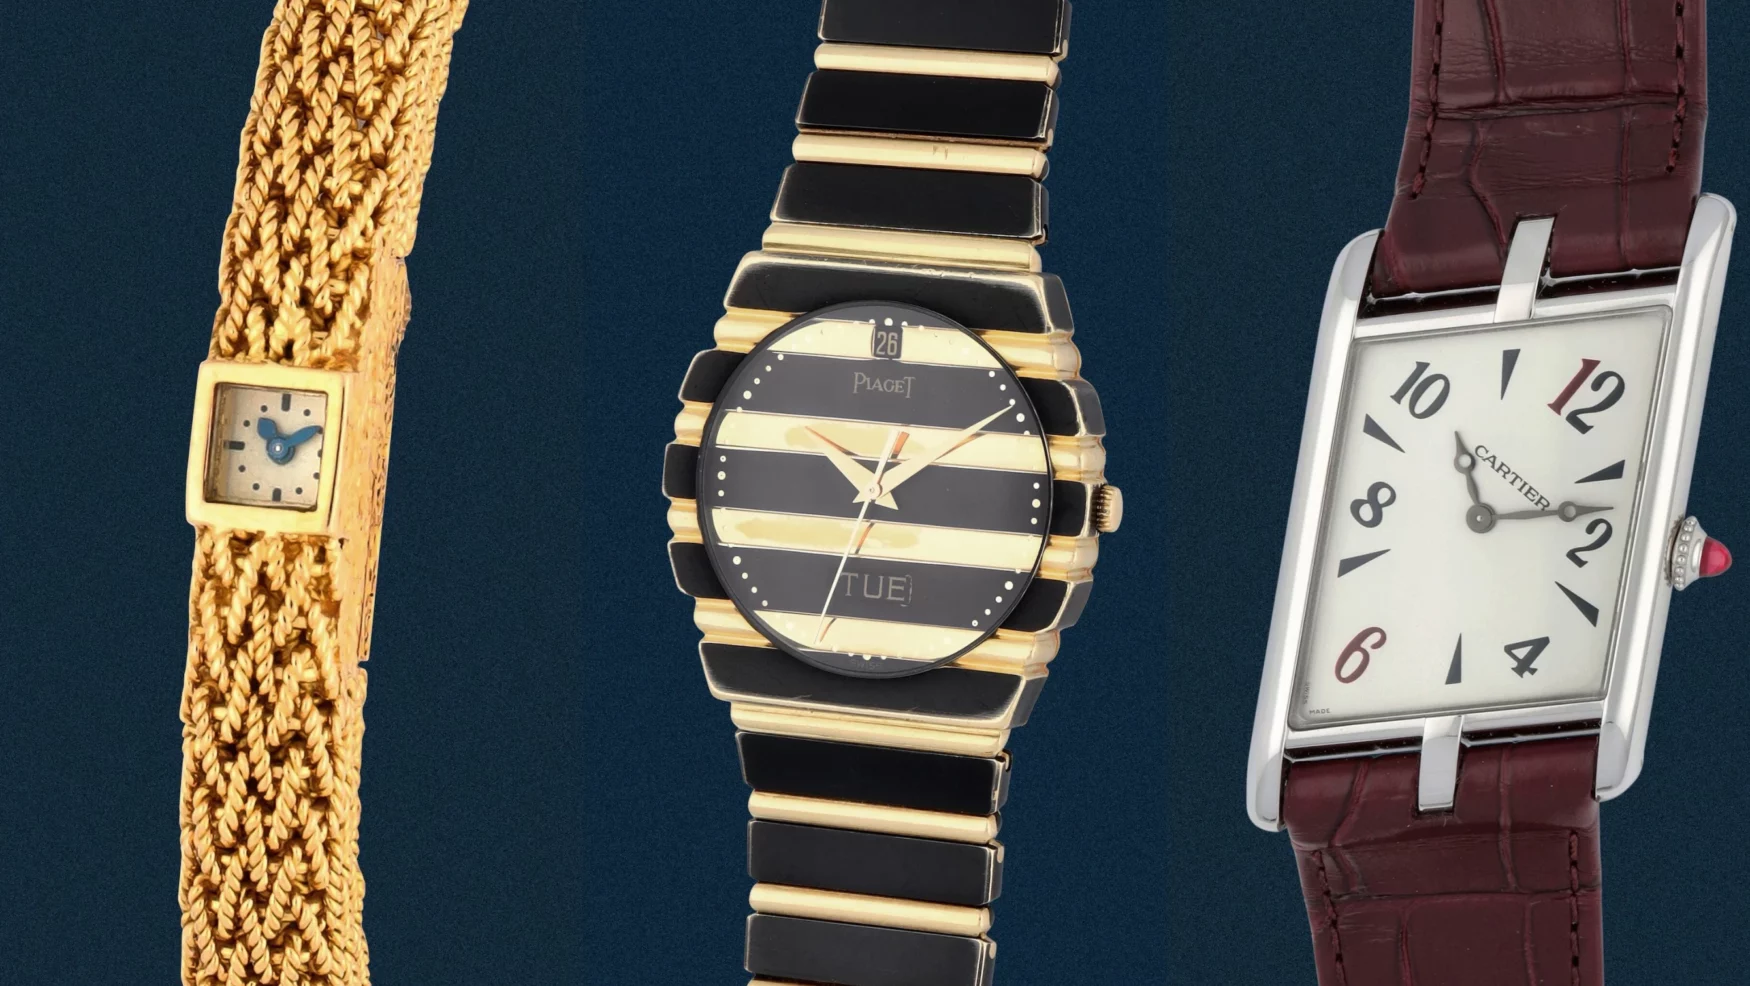 Sotheby’s is hosting a ‘Rough Diamonds’ watch auction soon in Geneva INSIDE A CAVE